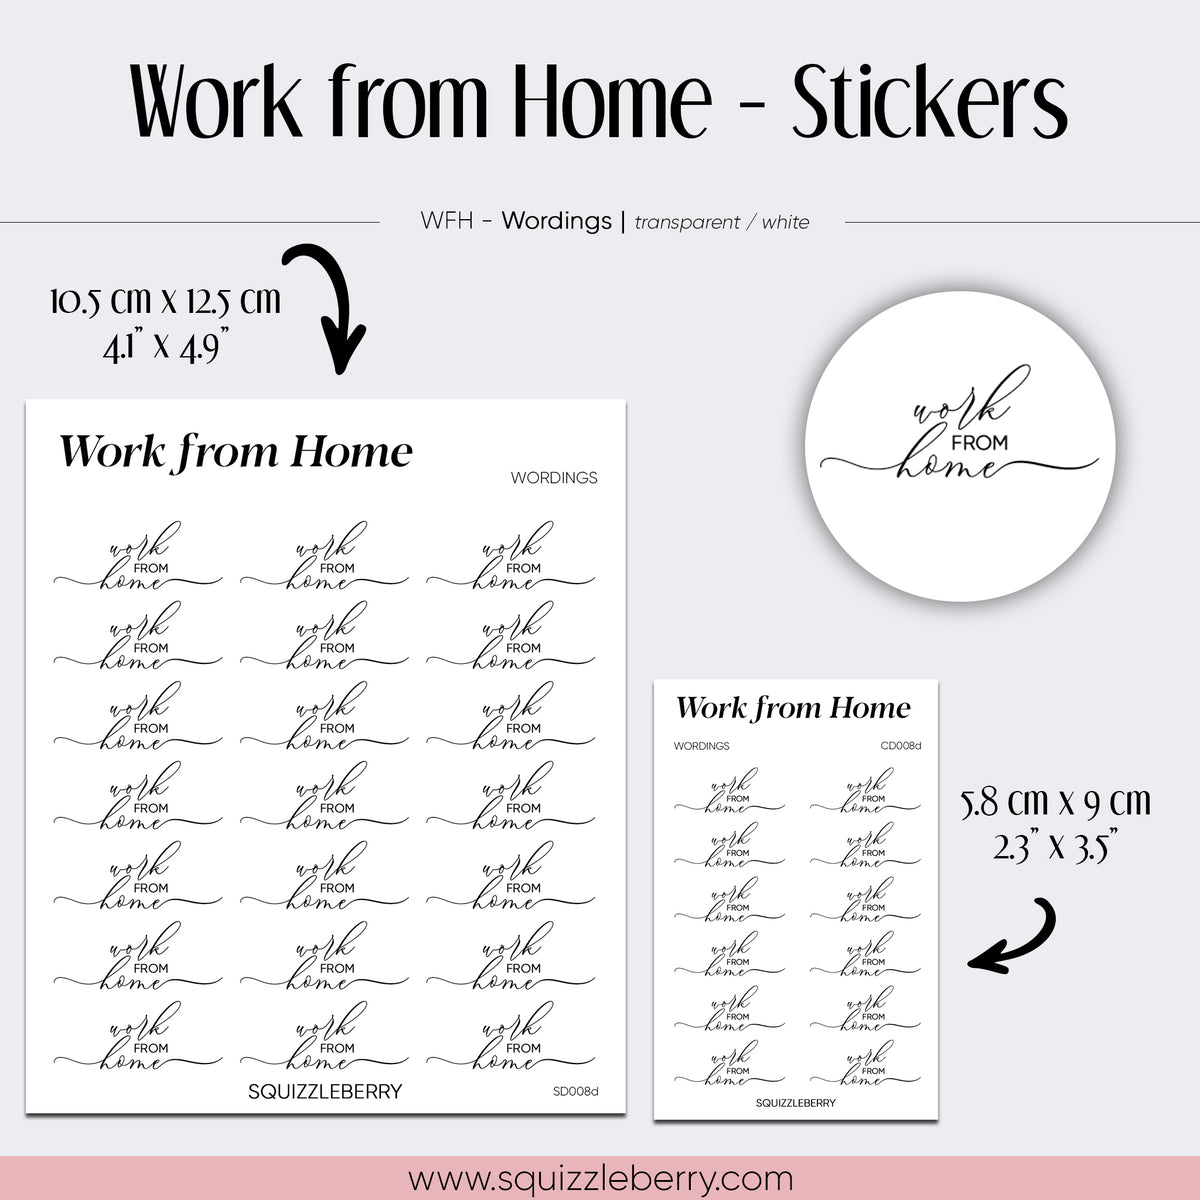 Work From Home - Stickers | SquizzleBerry